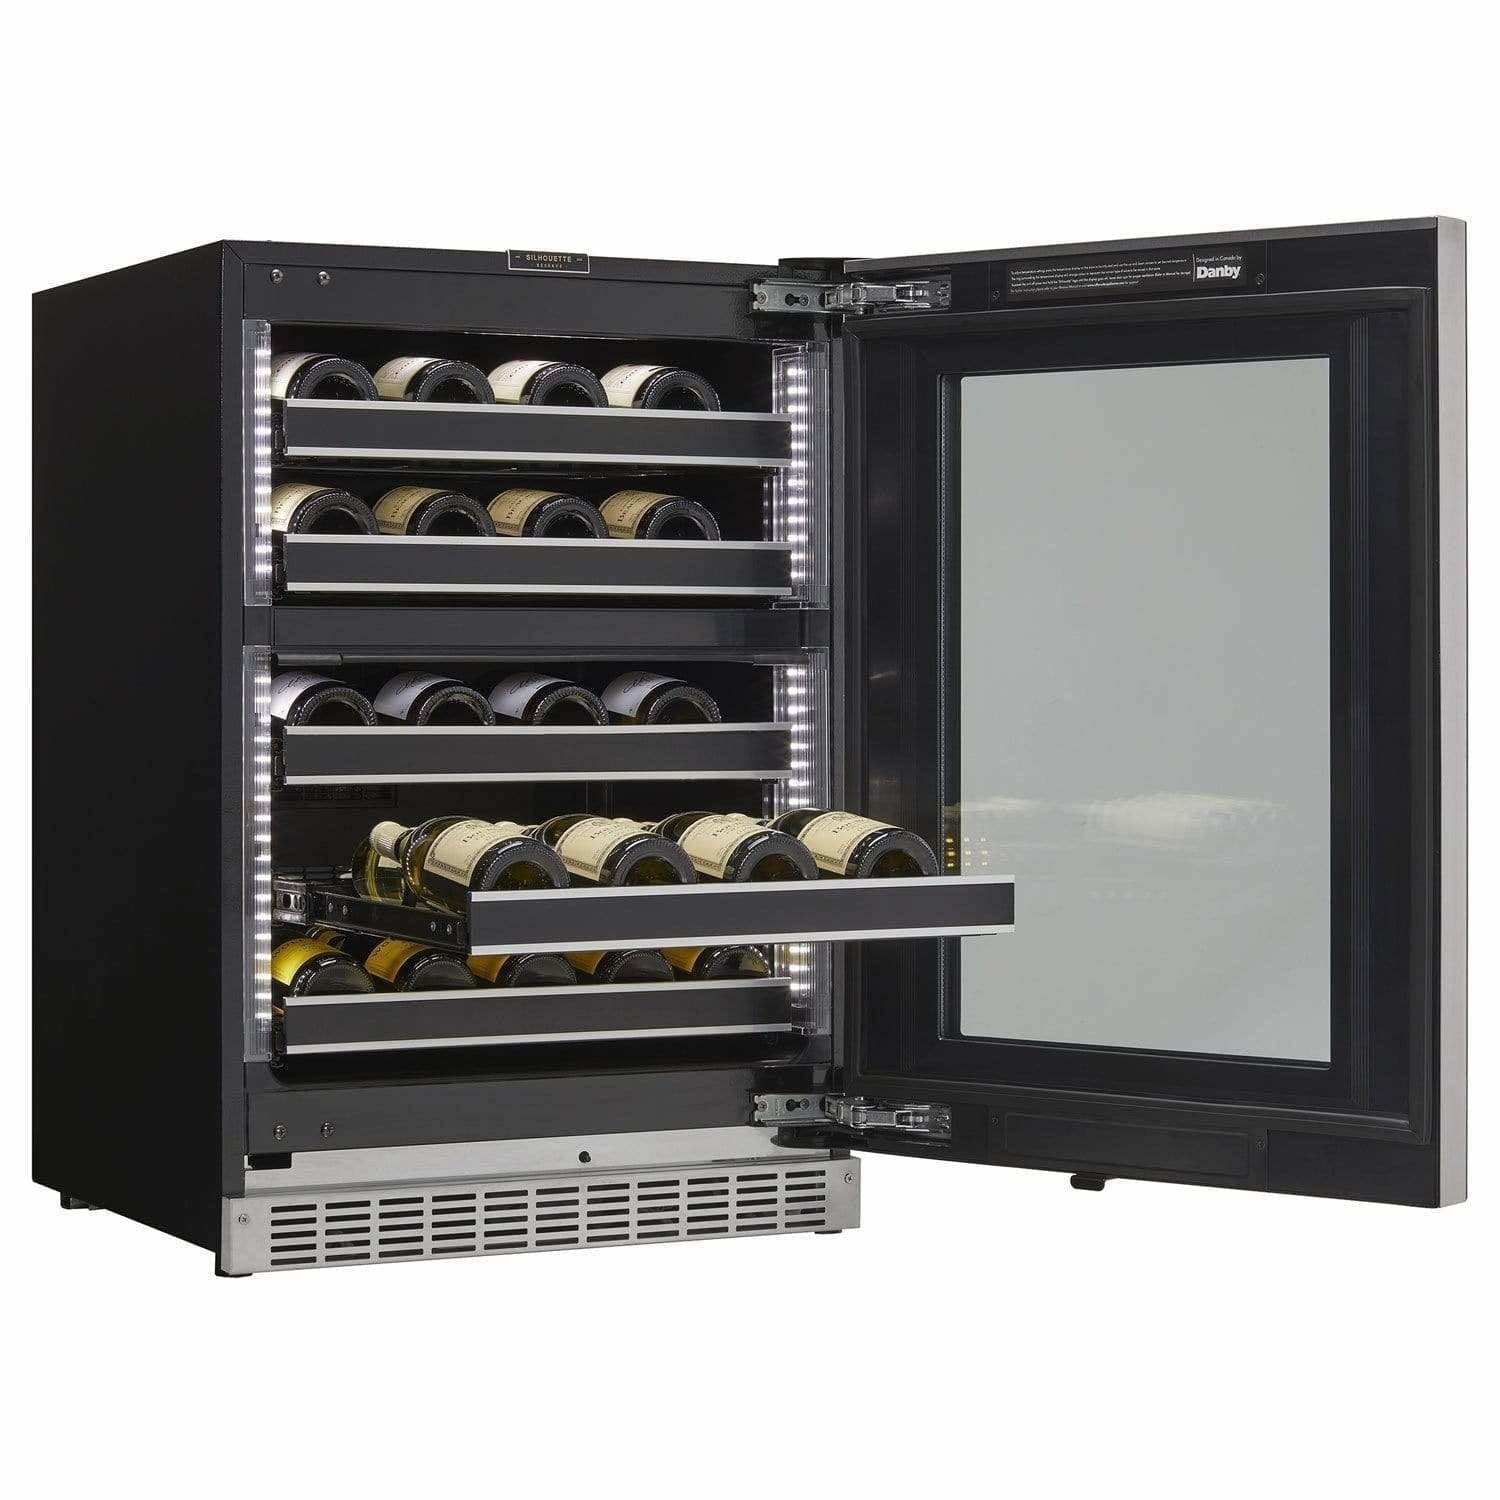 Danby Silhouette Reserve 24 Inch, 37 Bottle Capacity Dual Zone Wine Fridge SRVWC050 Wine Coolers Empire